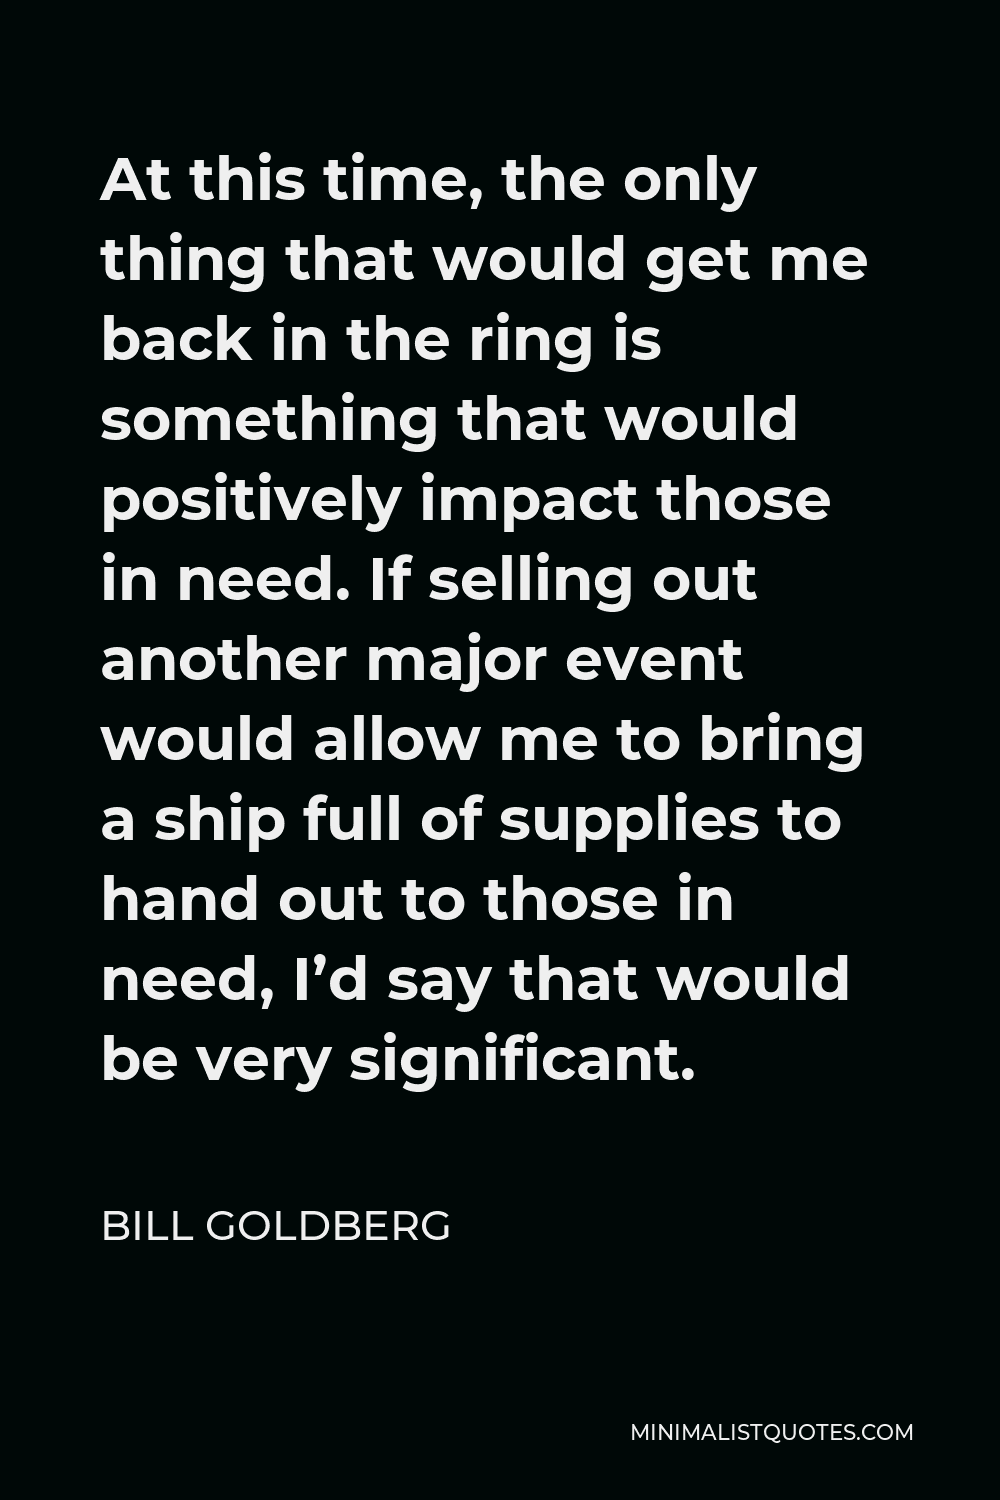 Bill Goldberg Quote - At this time, the only thing that would get me back in the ring is something that would positively impact those in need. If selling out another major event would allow me to bring a ship full of supplies to hand out to those in need, I’d say that would be very significant.